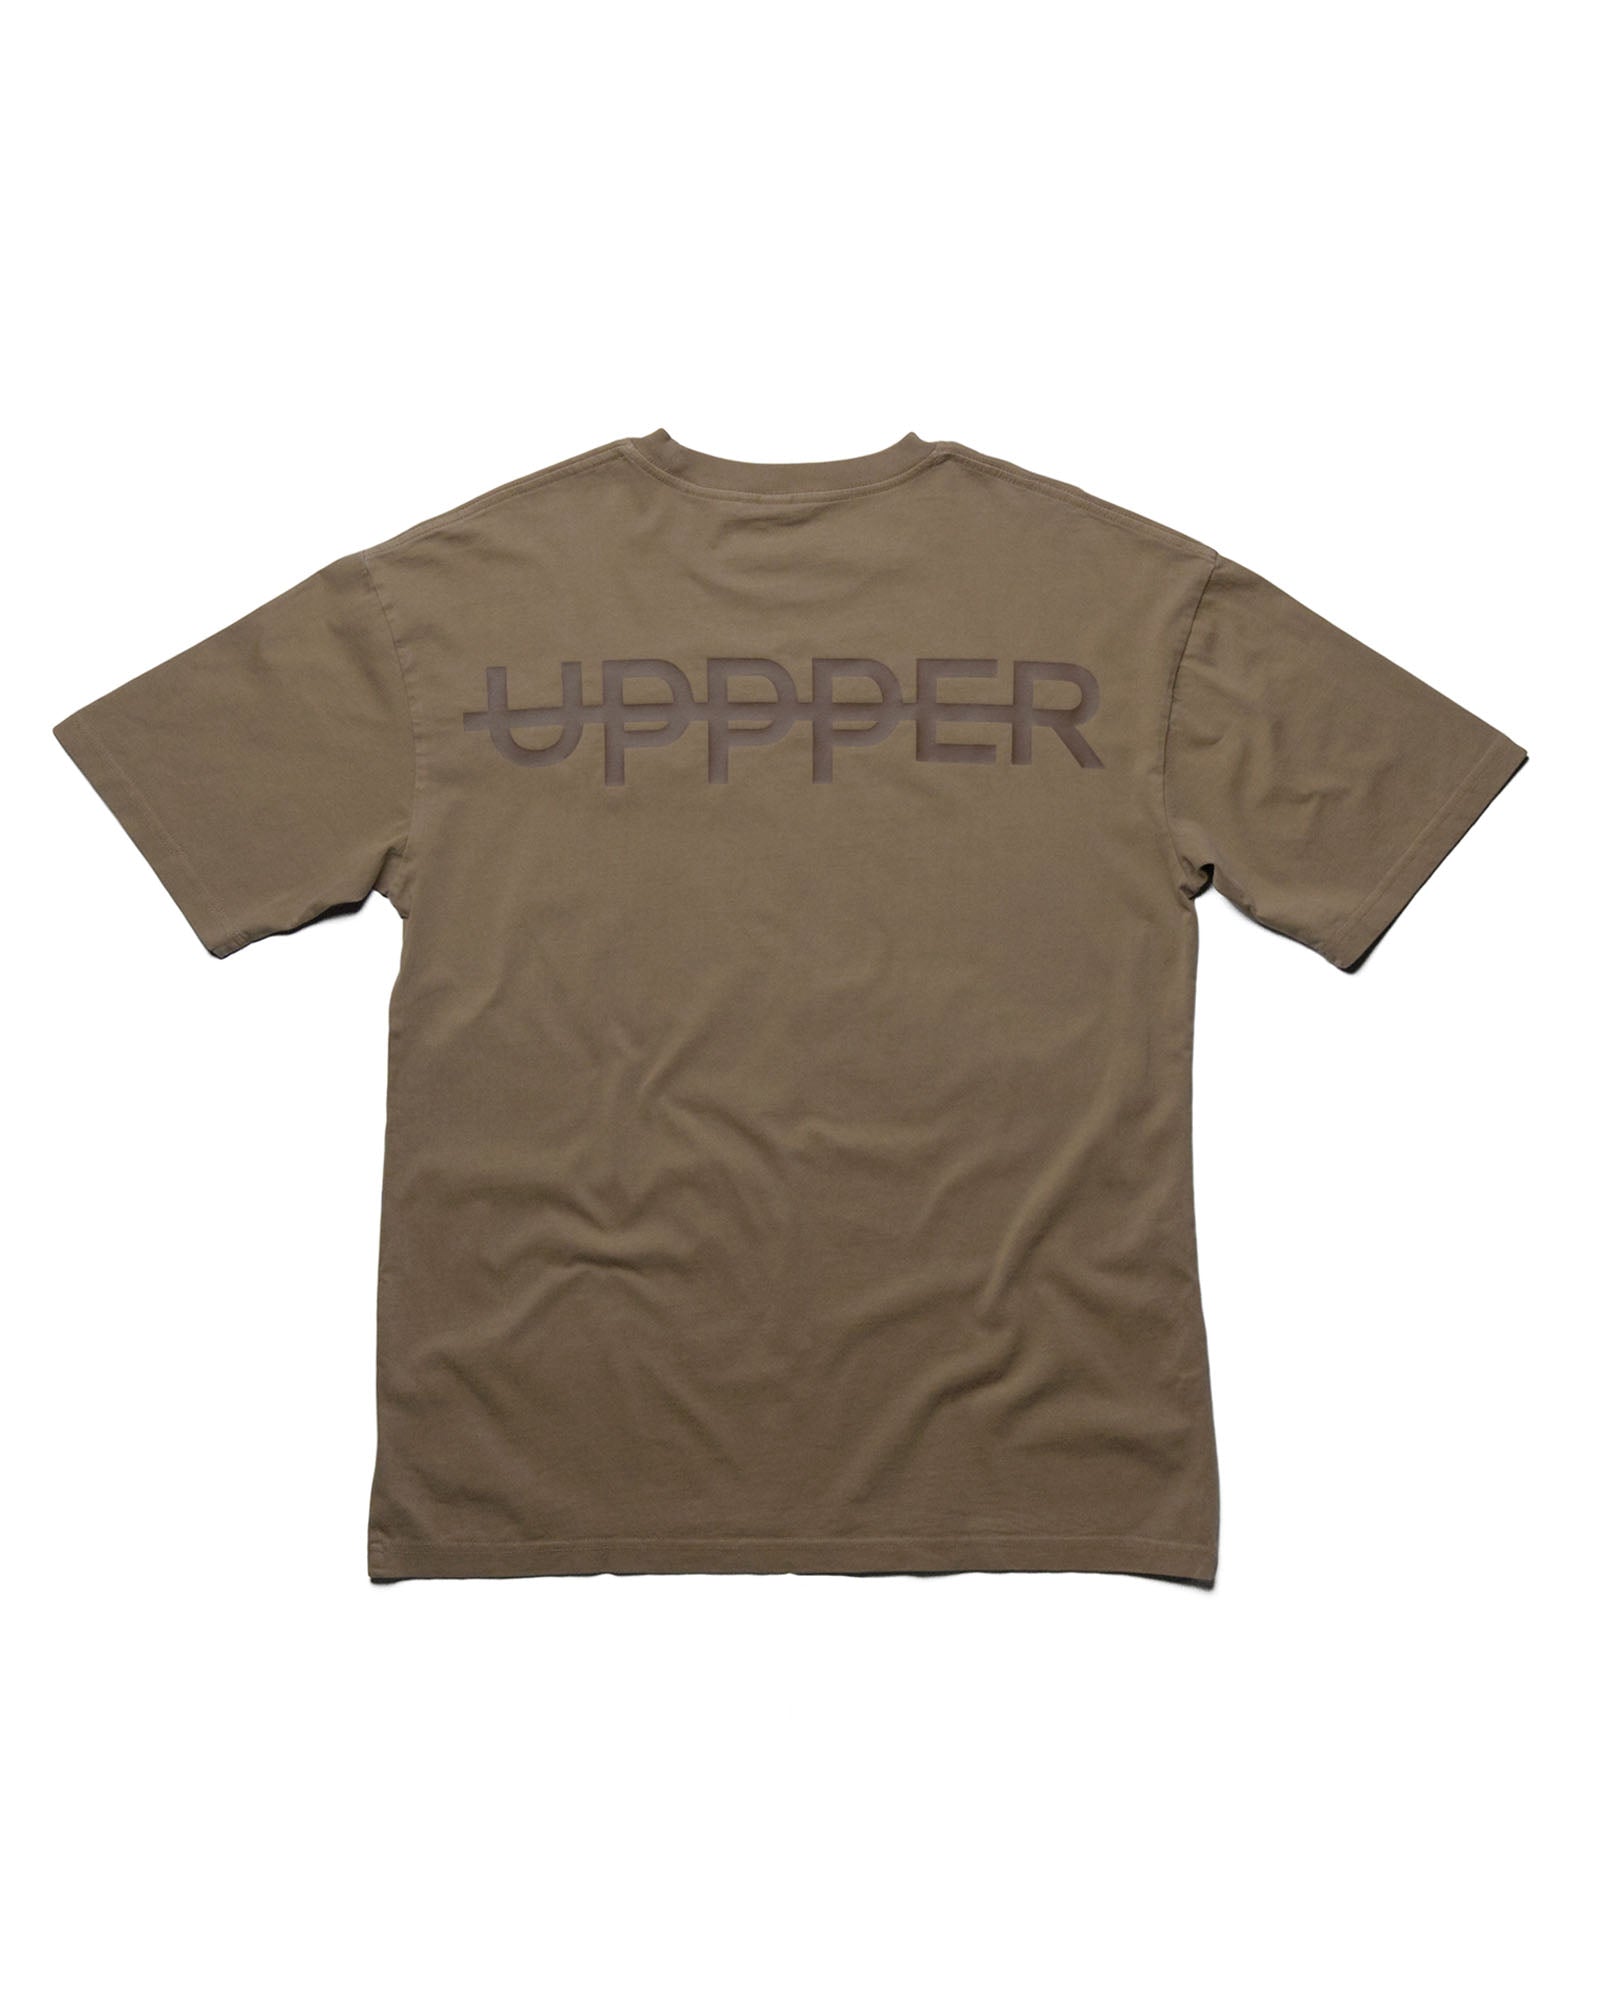 Core T-Shirt - Washed Brown – UPPPER Gear